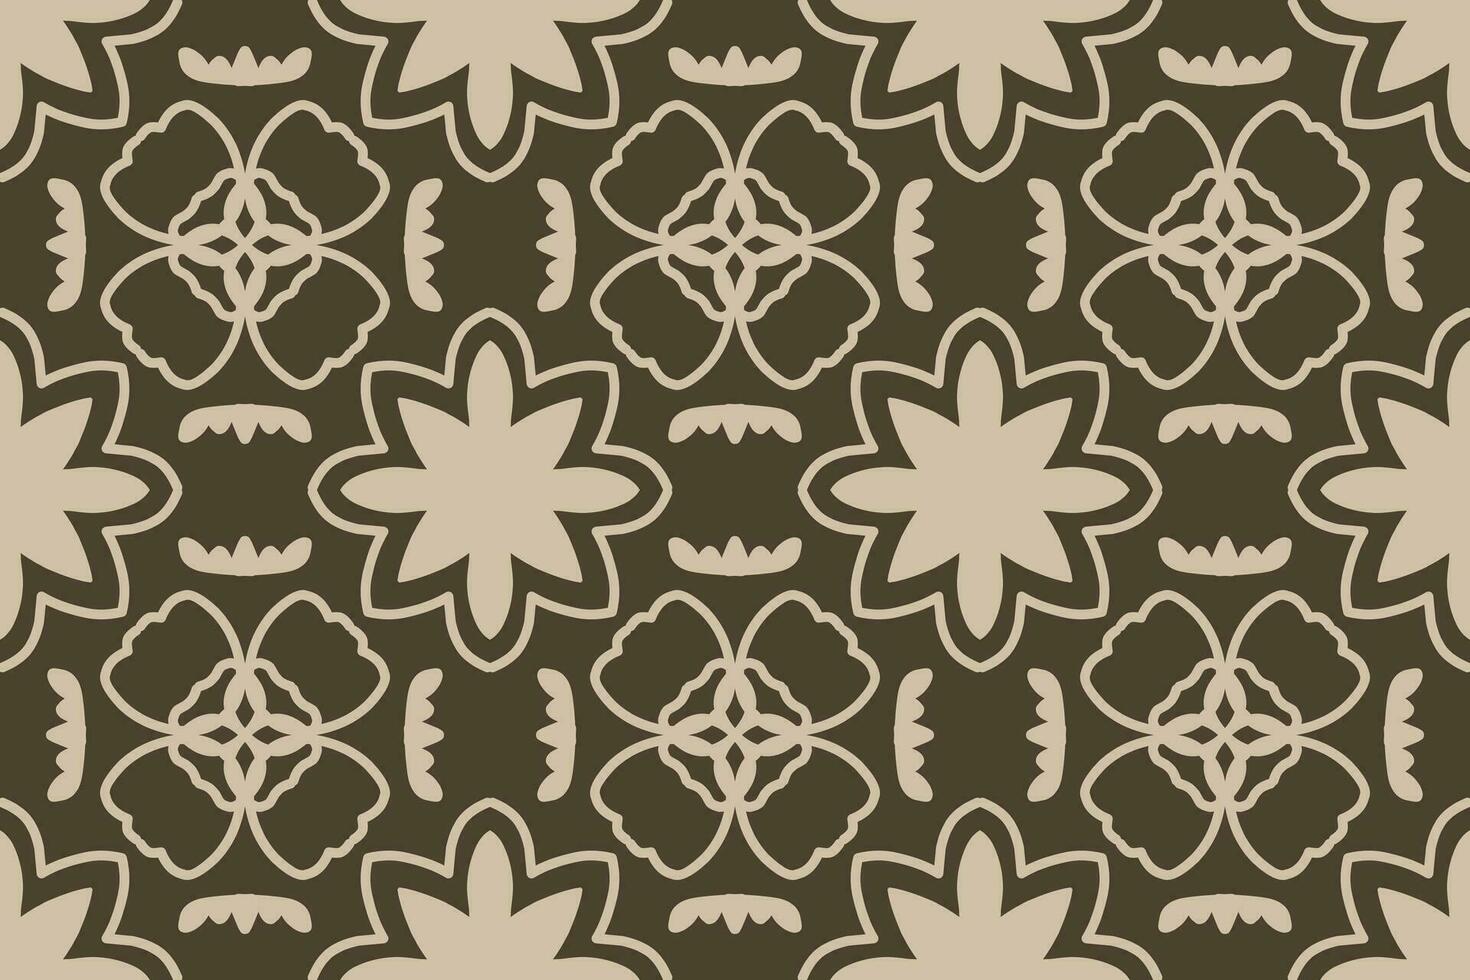 batik motif design, can be used for background or fabric design. This design can be connected repeatedly and will always connect vector